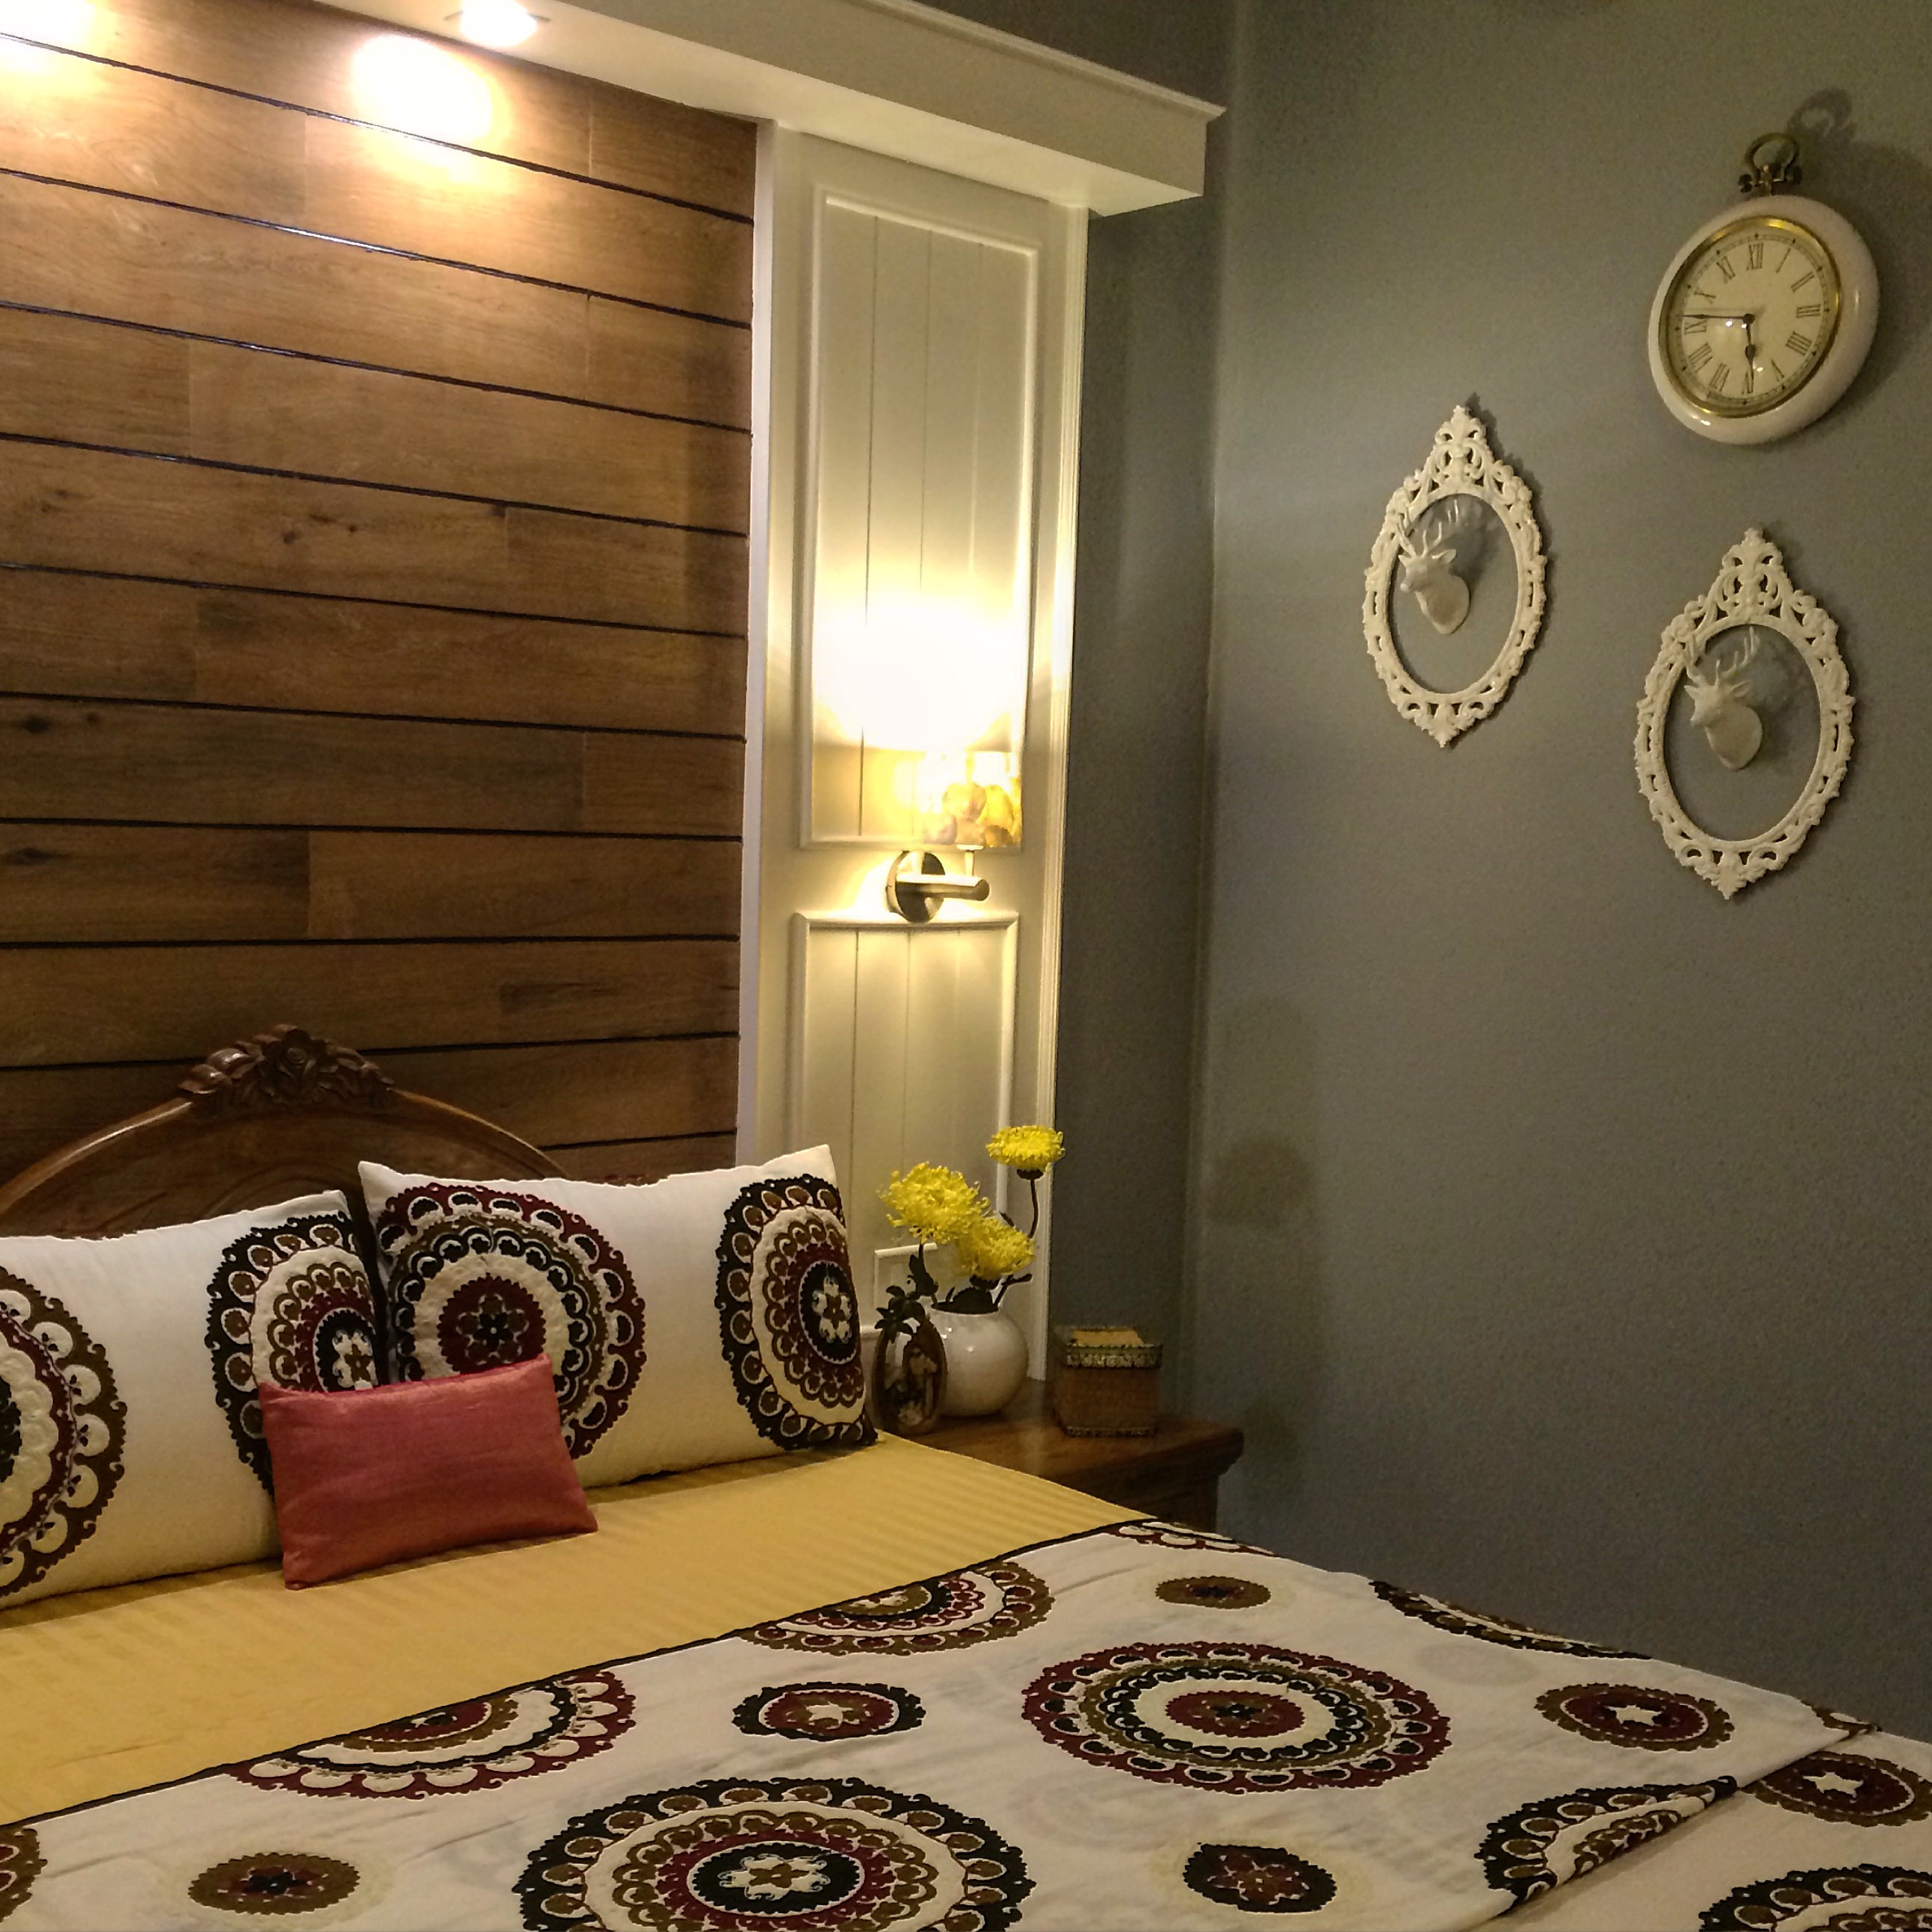 The guest room are decorated with frames on the wall with the beautiful deer heads on it, the embroidery on the bed covers and grey wall | Joseph home tour